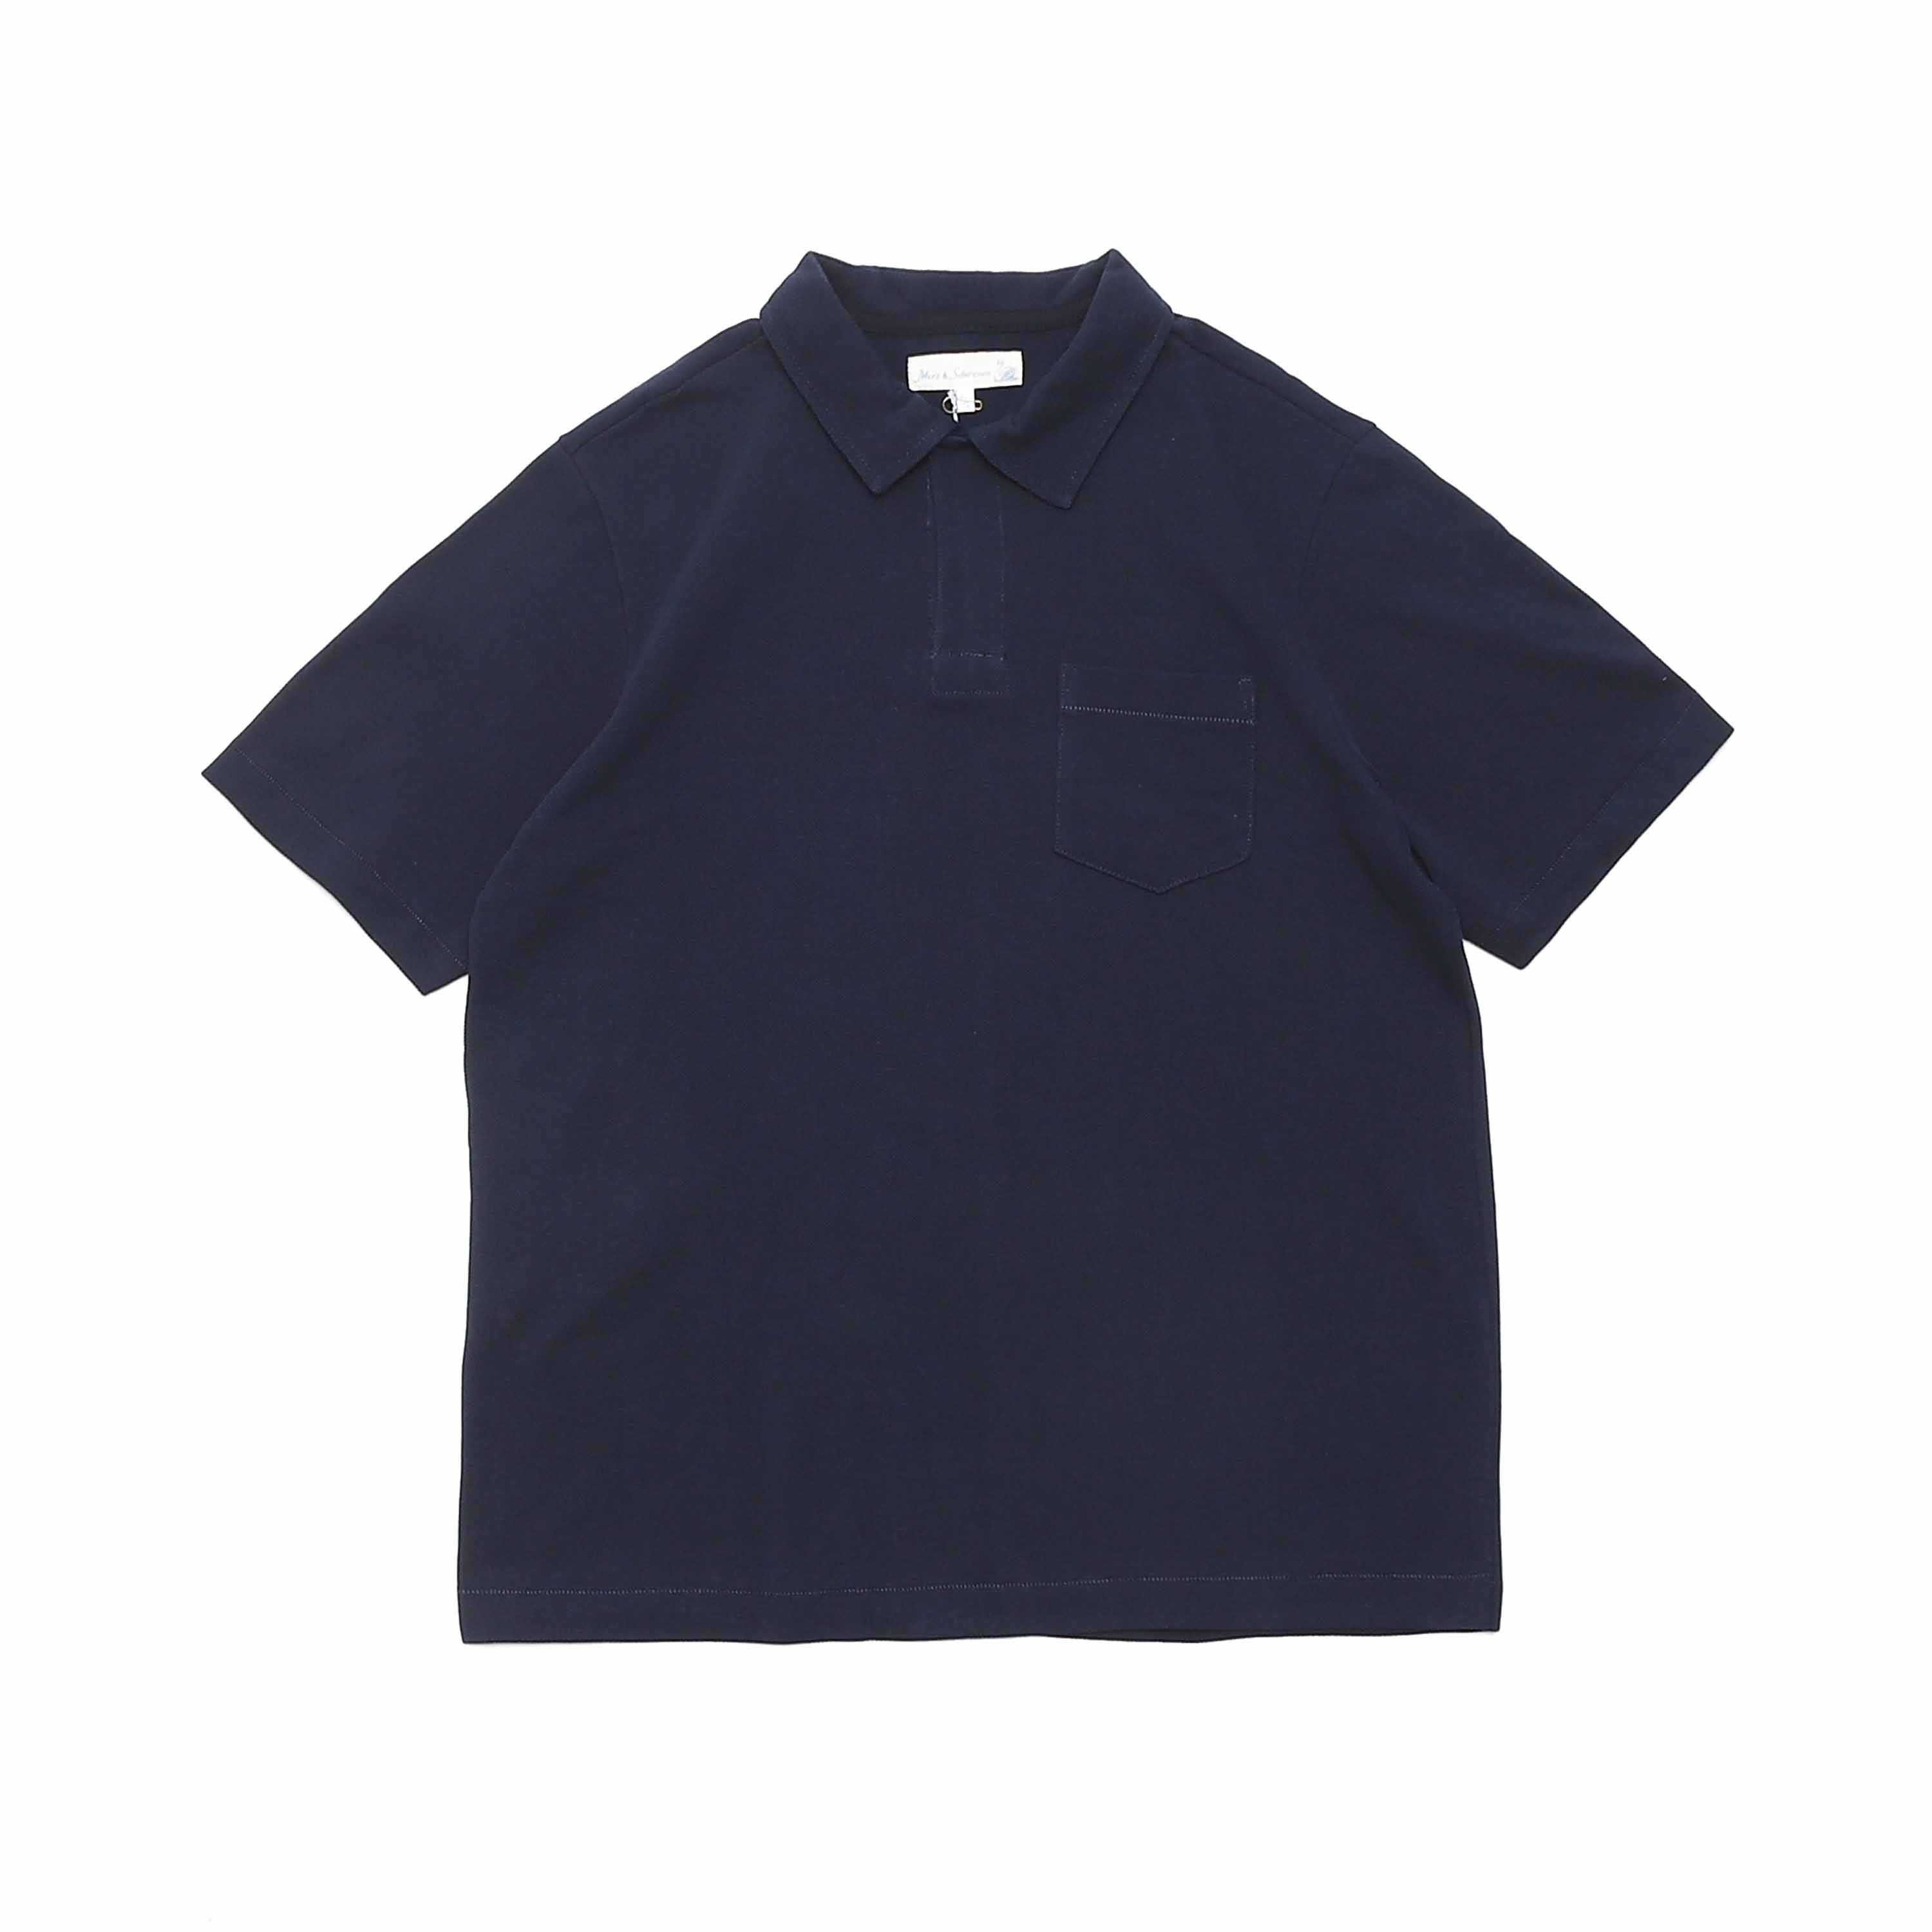 POLO SHIRT WITH POCKET(2PKPL) - INK BLUE